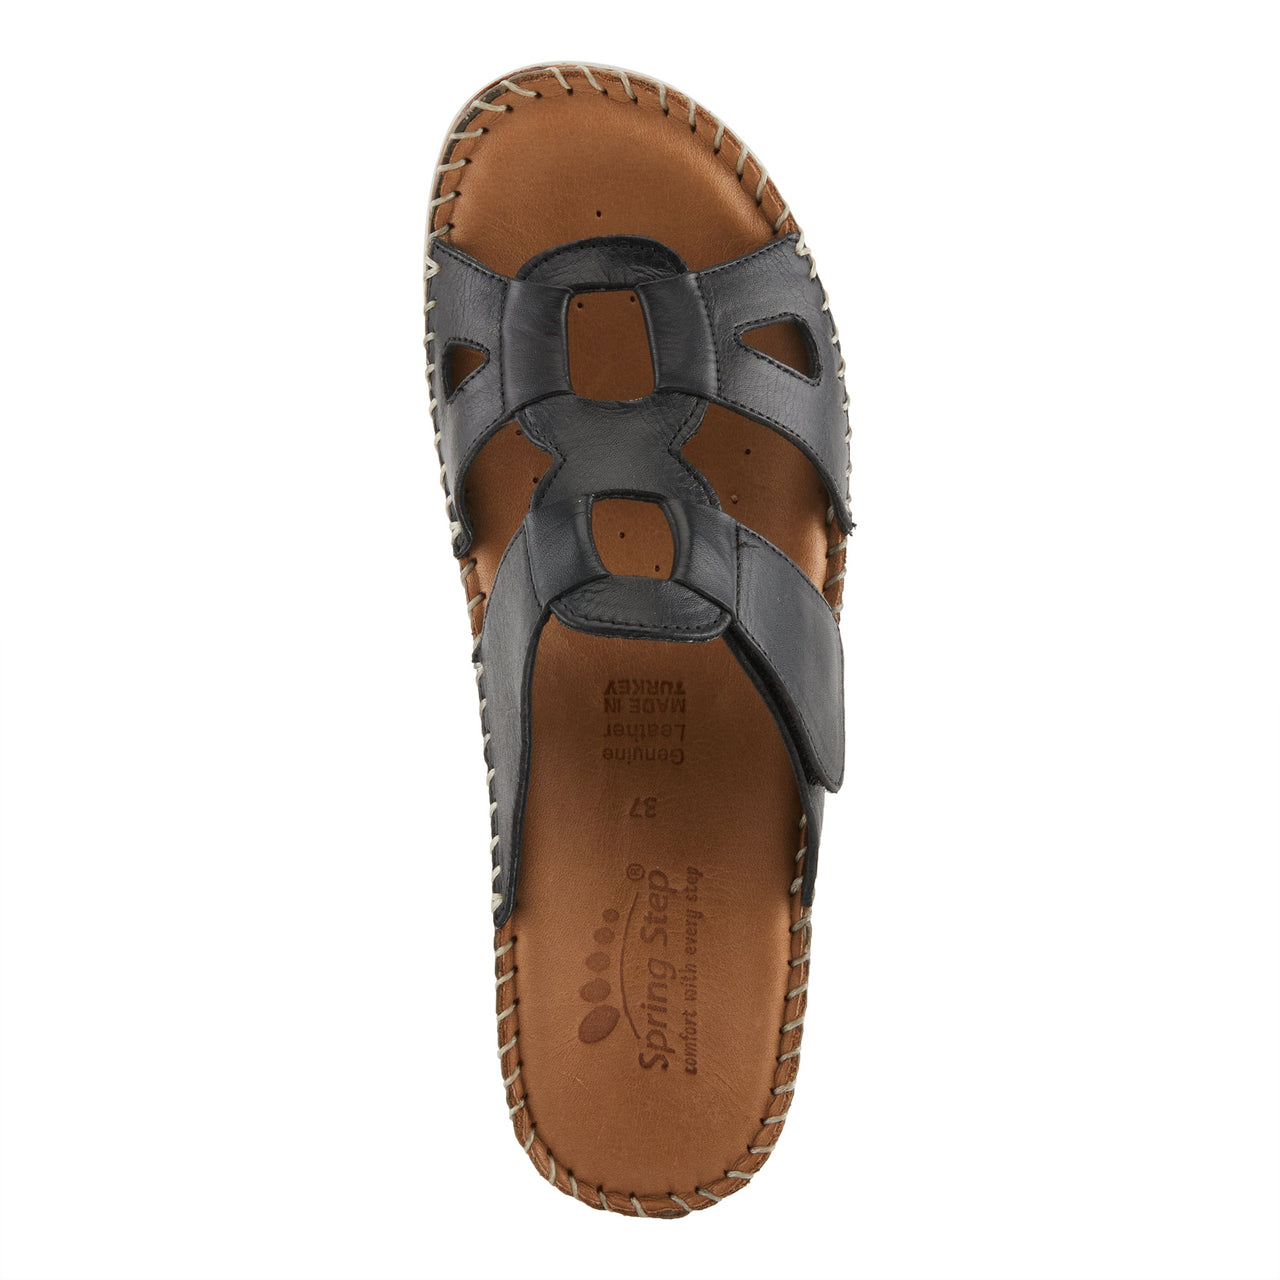  Spring Step Montera Sandals in Turquoise with Embossed Design and Adjustable Straps